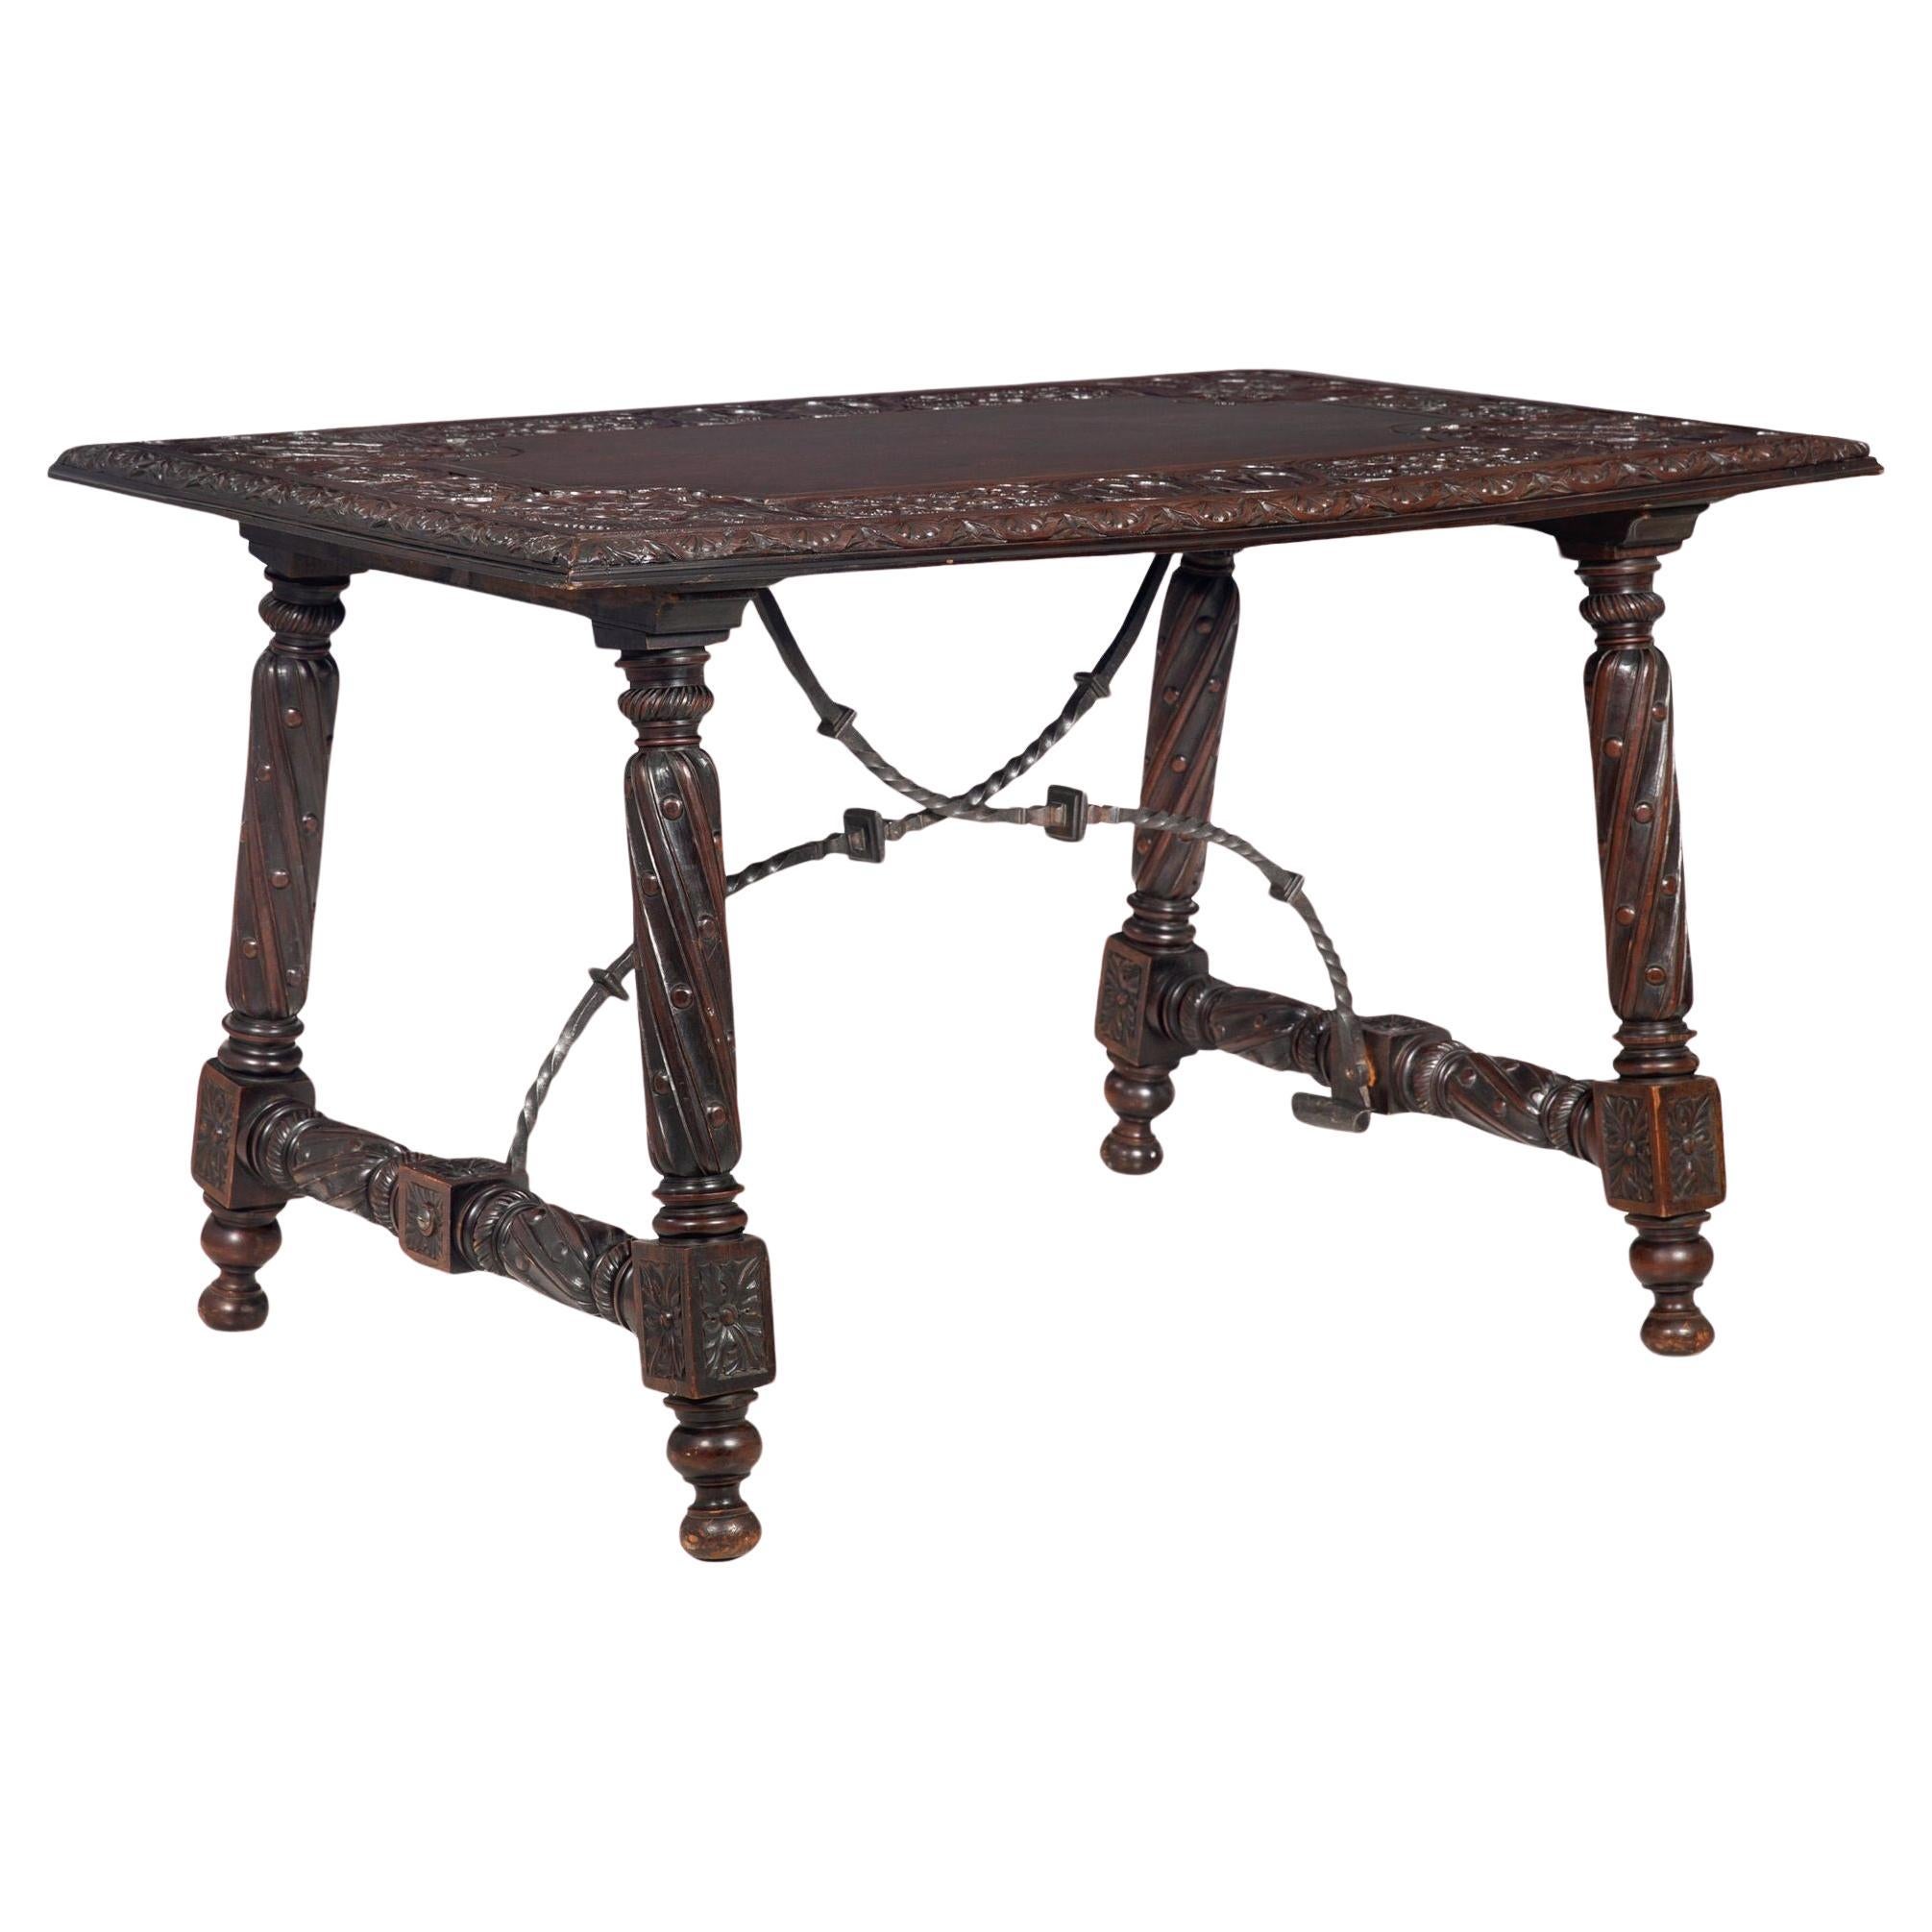 Circa 1900 Gothic Revival Antique Carved Walnut Library Table For Sale